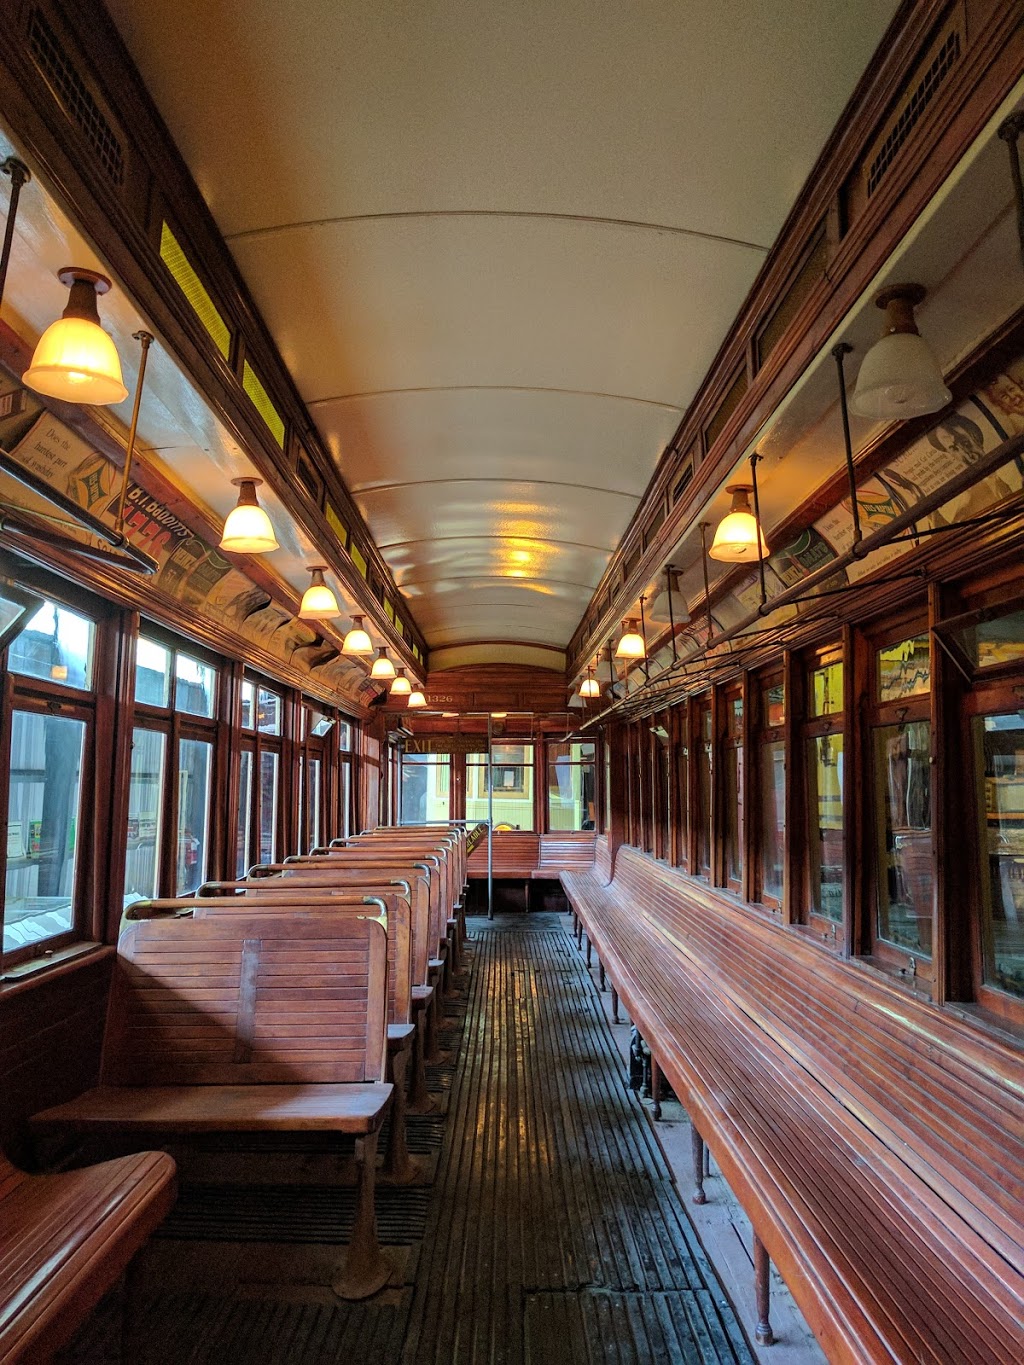 Halton County Radial Railway Museum | 13629 Guelph Line, Campbellville, ON L0P 1B0, Canada | Phone: (519) 856-9802